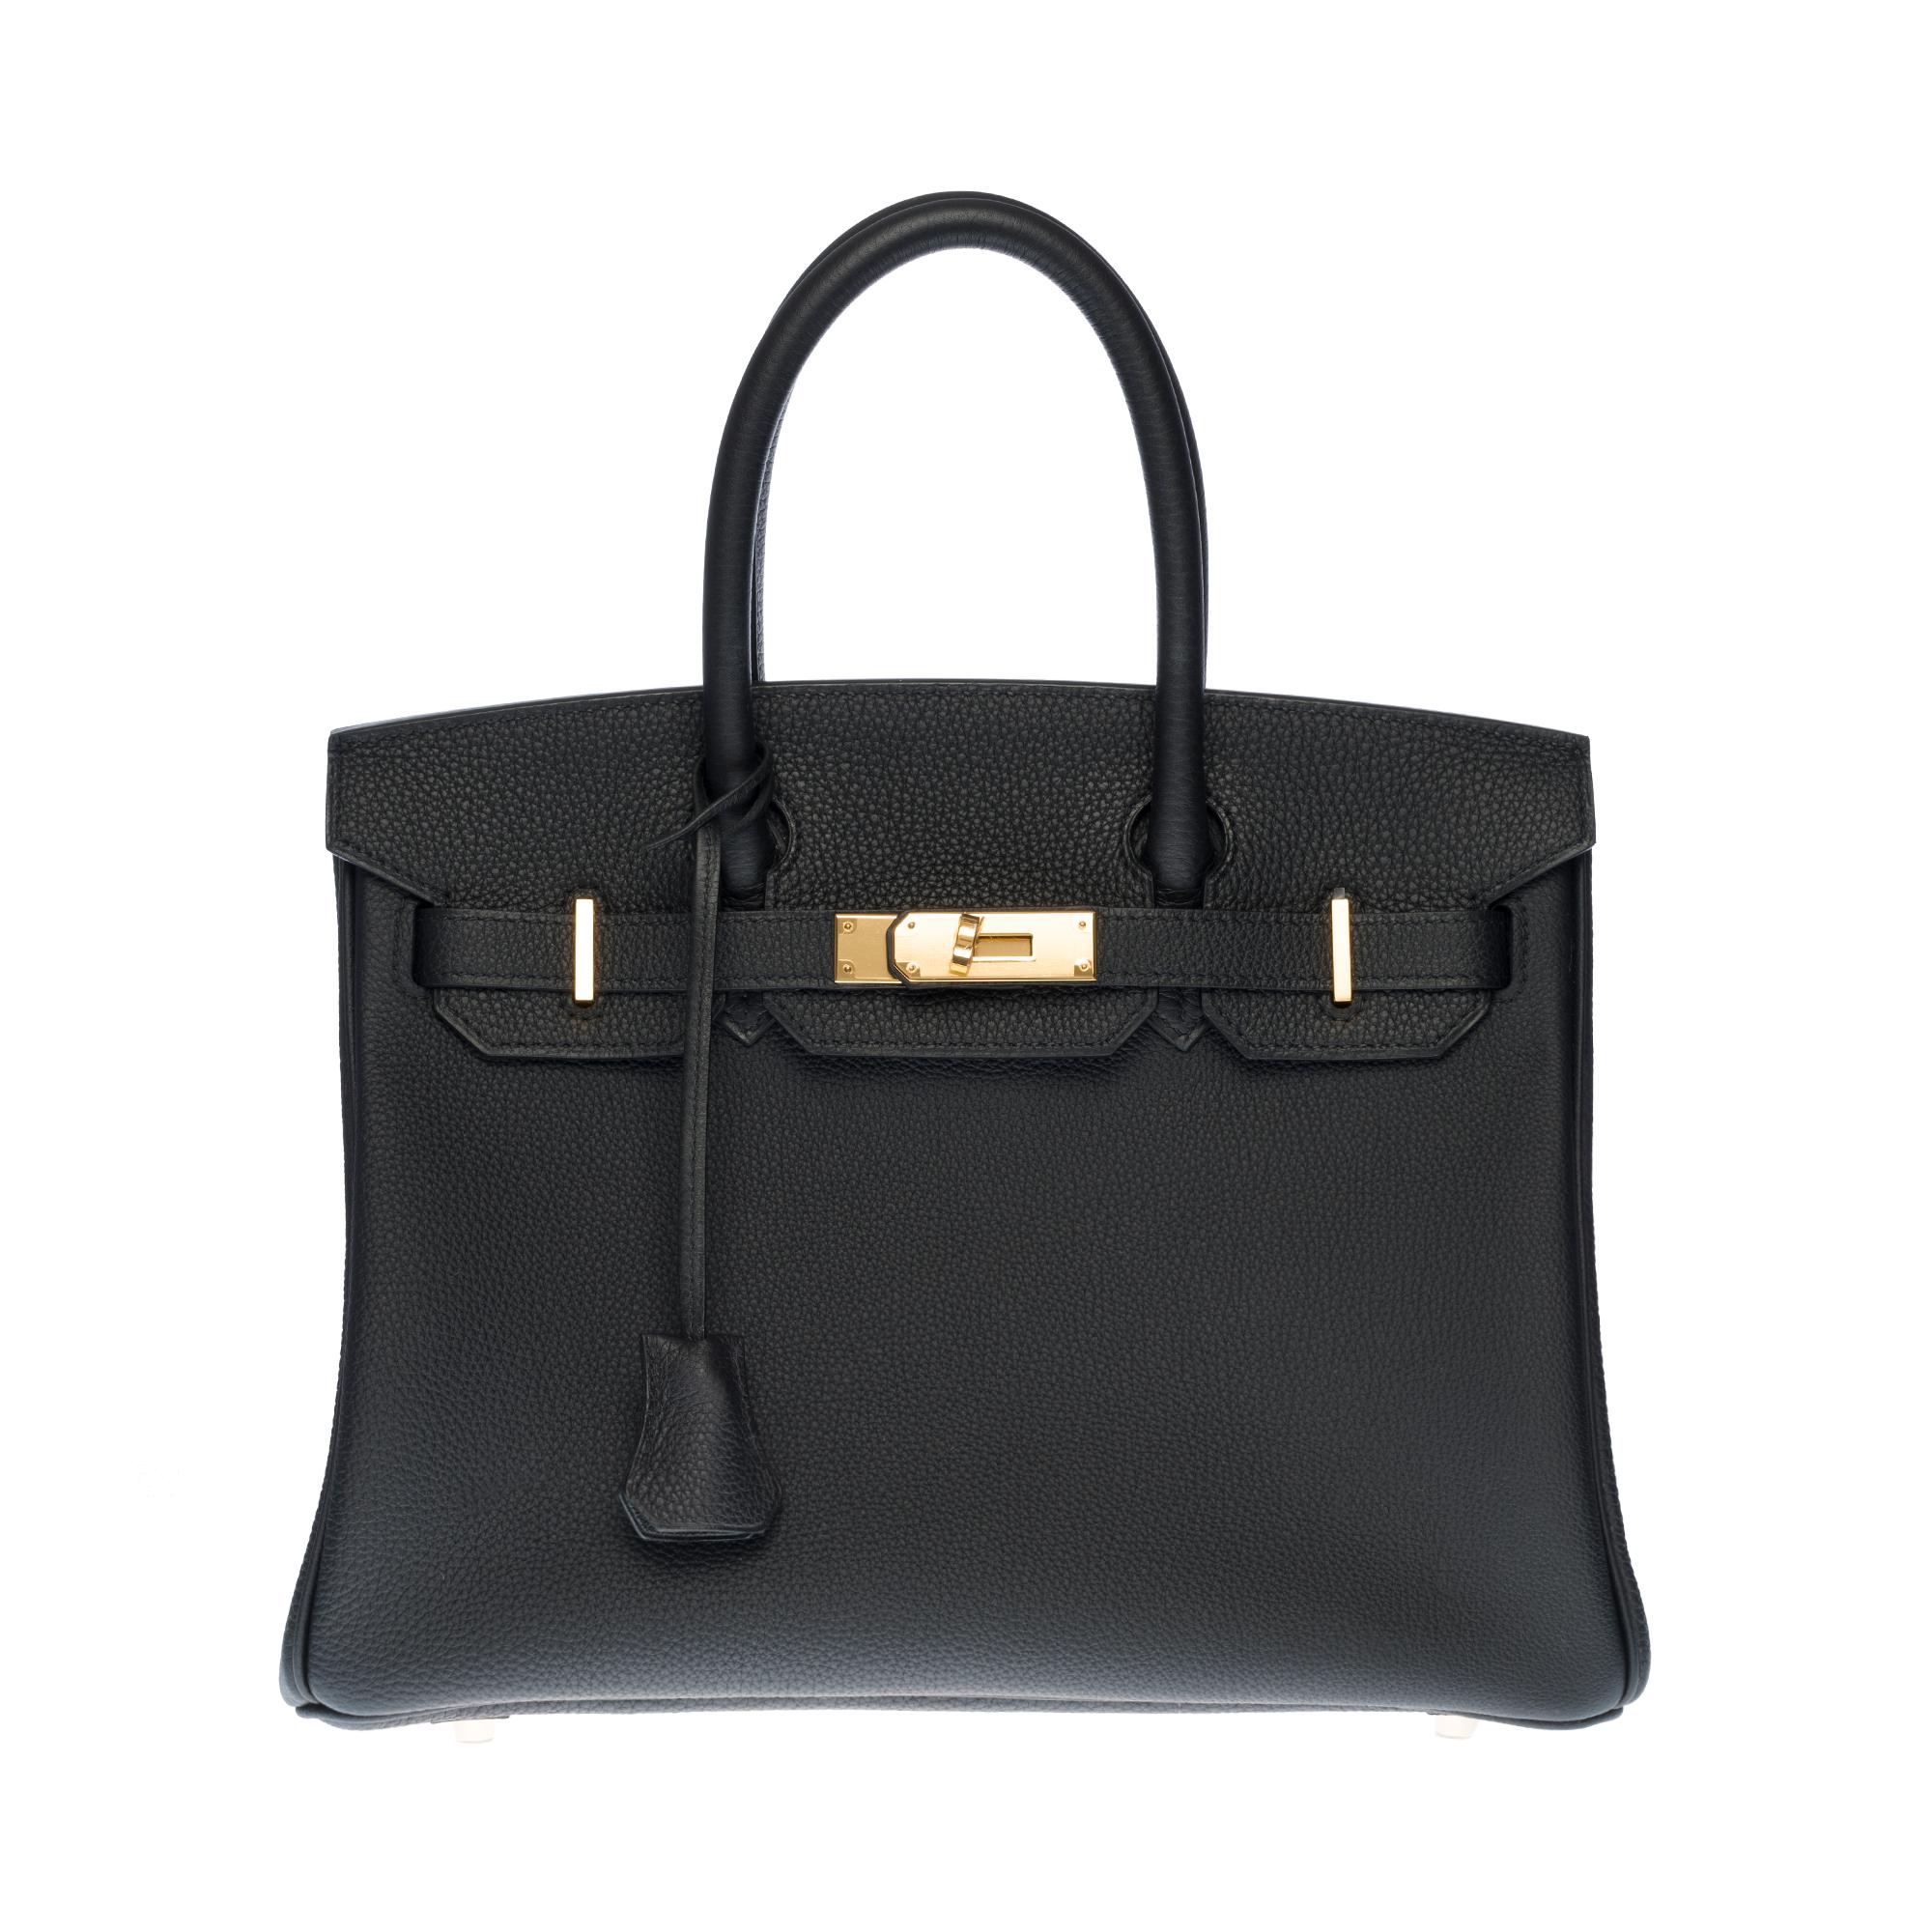 Beautiful Hermes Birkin 30 cm handbag in black Togo leather, gold-plated metal hardware, double handle in black leather allowing a handheld.

Closure by flap.
Lining in black leather, a zipped pocket, a patch pocket.
Signature: 